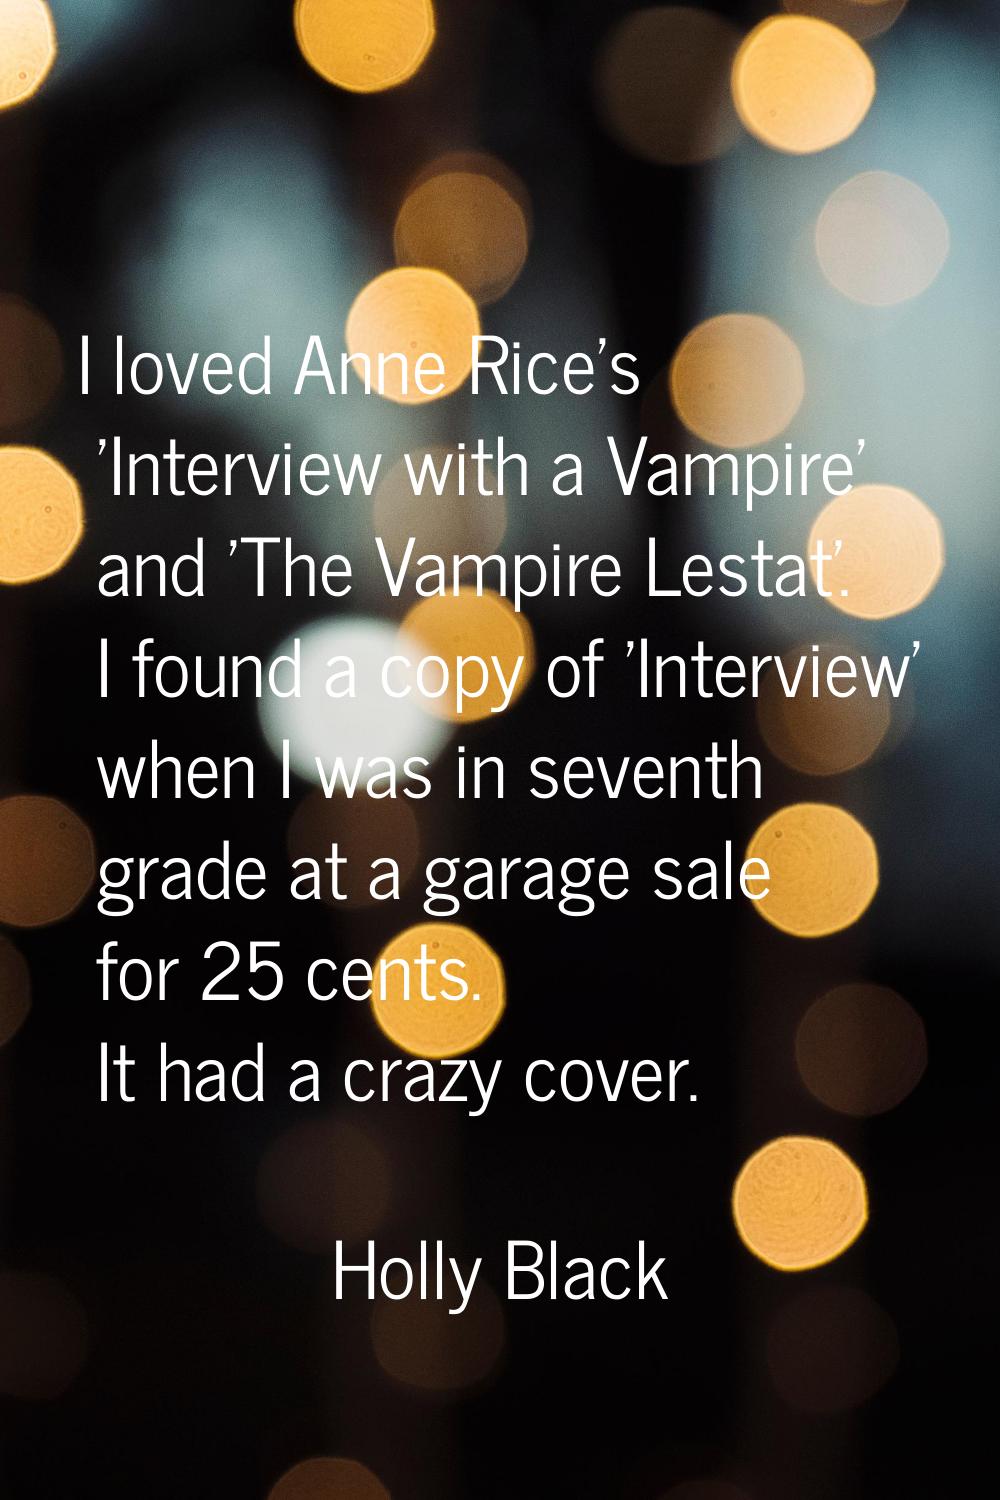 I loved Anne Rice's 'Interview with a Vampire' and 'The Vampire Lestat'. I found a copy of 'Intervi